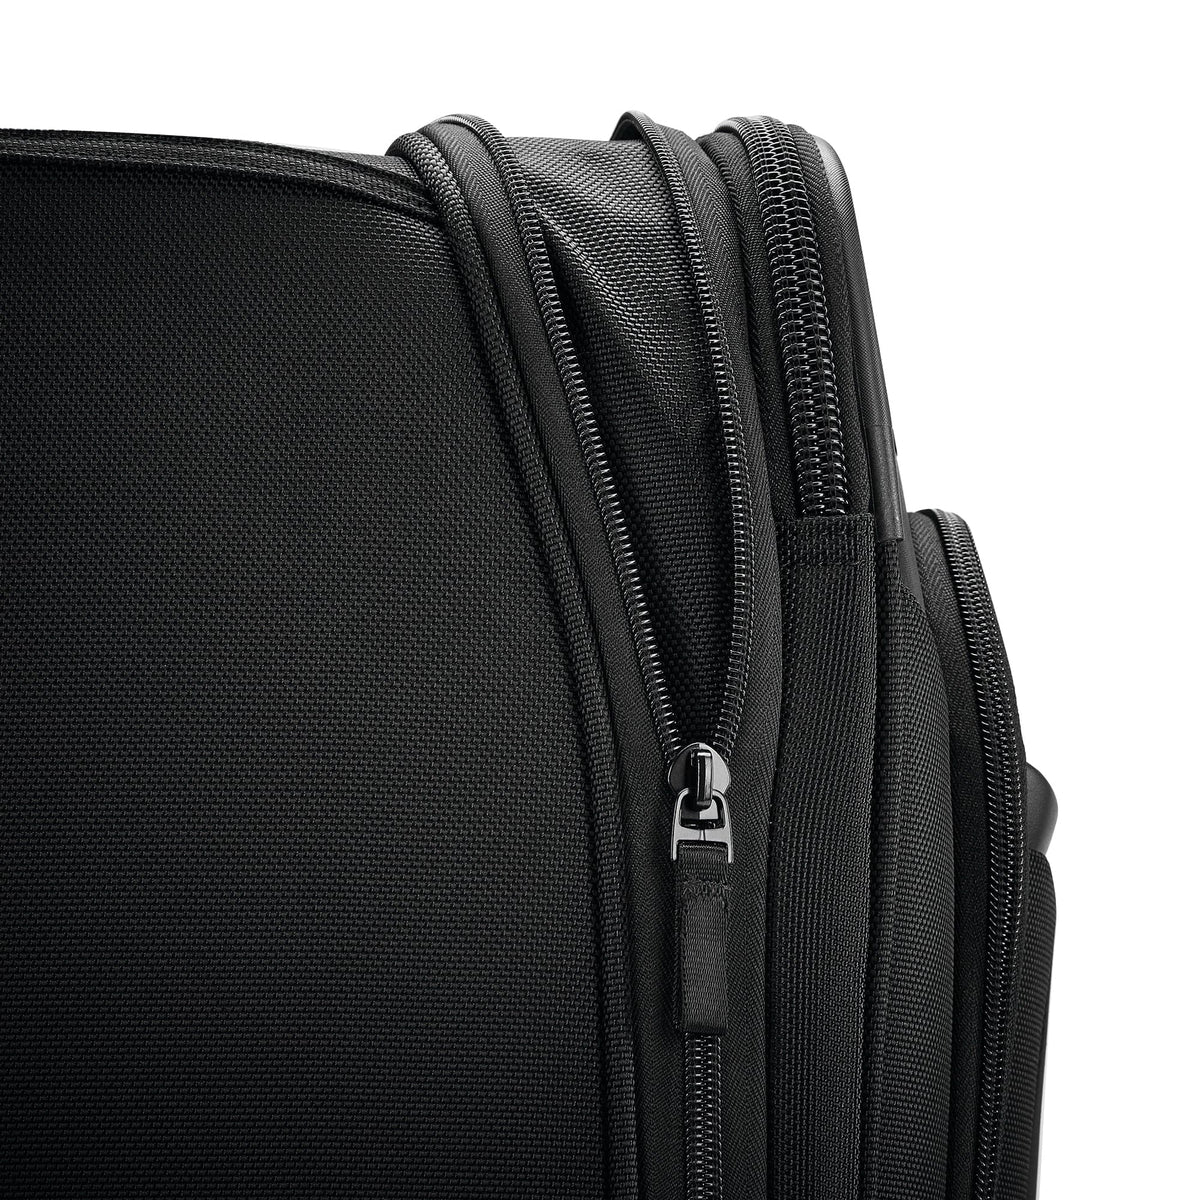 Samsonite Pro 25" Carry-On Expandable Spinner Luggage